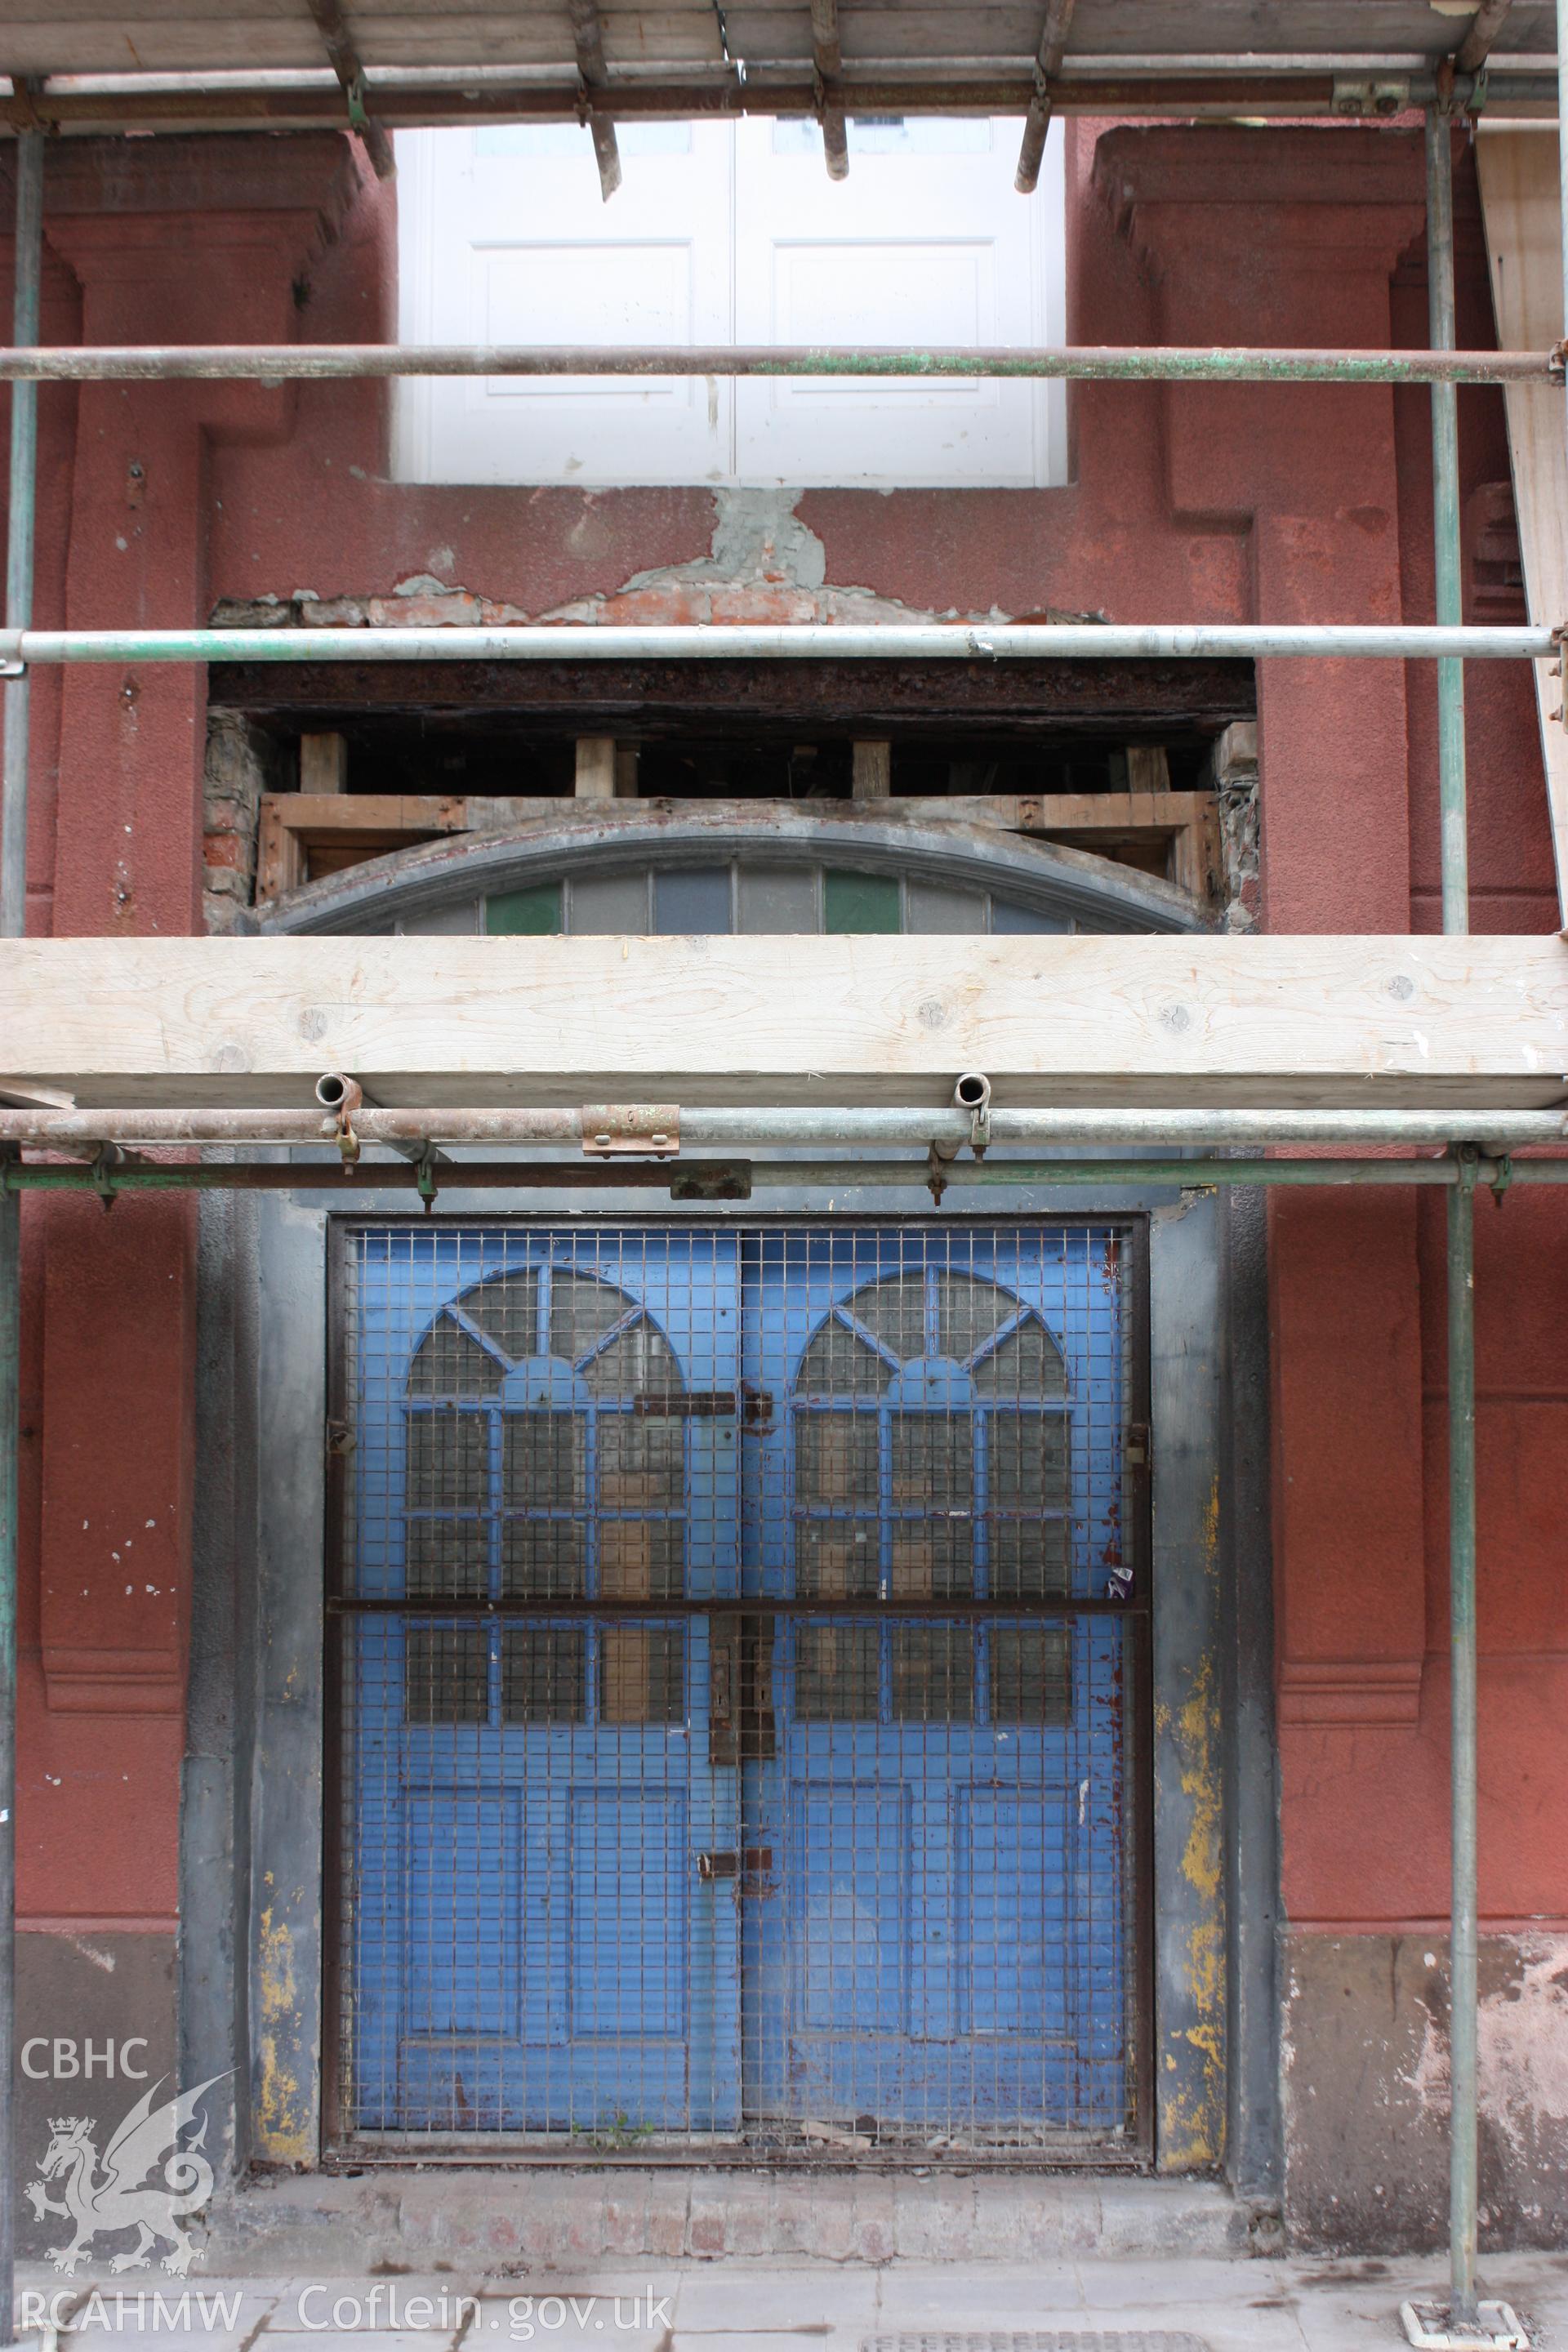 Colour photograph showing exterior view of ground floor double doors at the Old Auction Rooms/ Liberal Club in Aberystwyth. Photographic survey conducted by Geoff Ward on 9th June 2010 during repair work prior to conversion into flats.